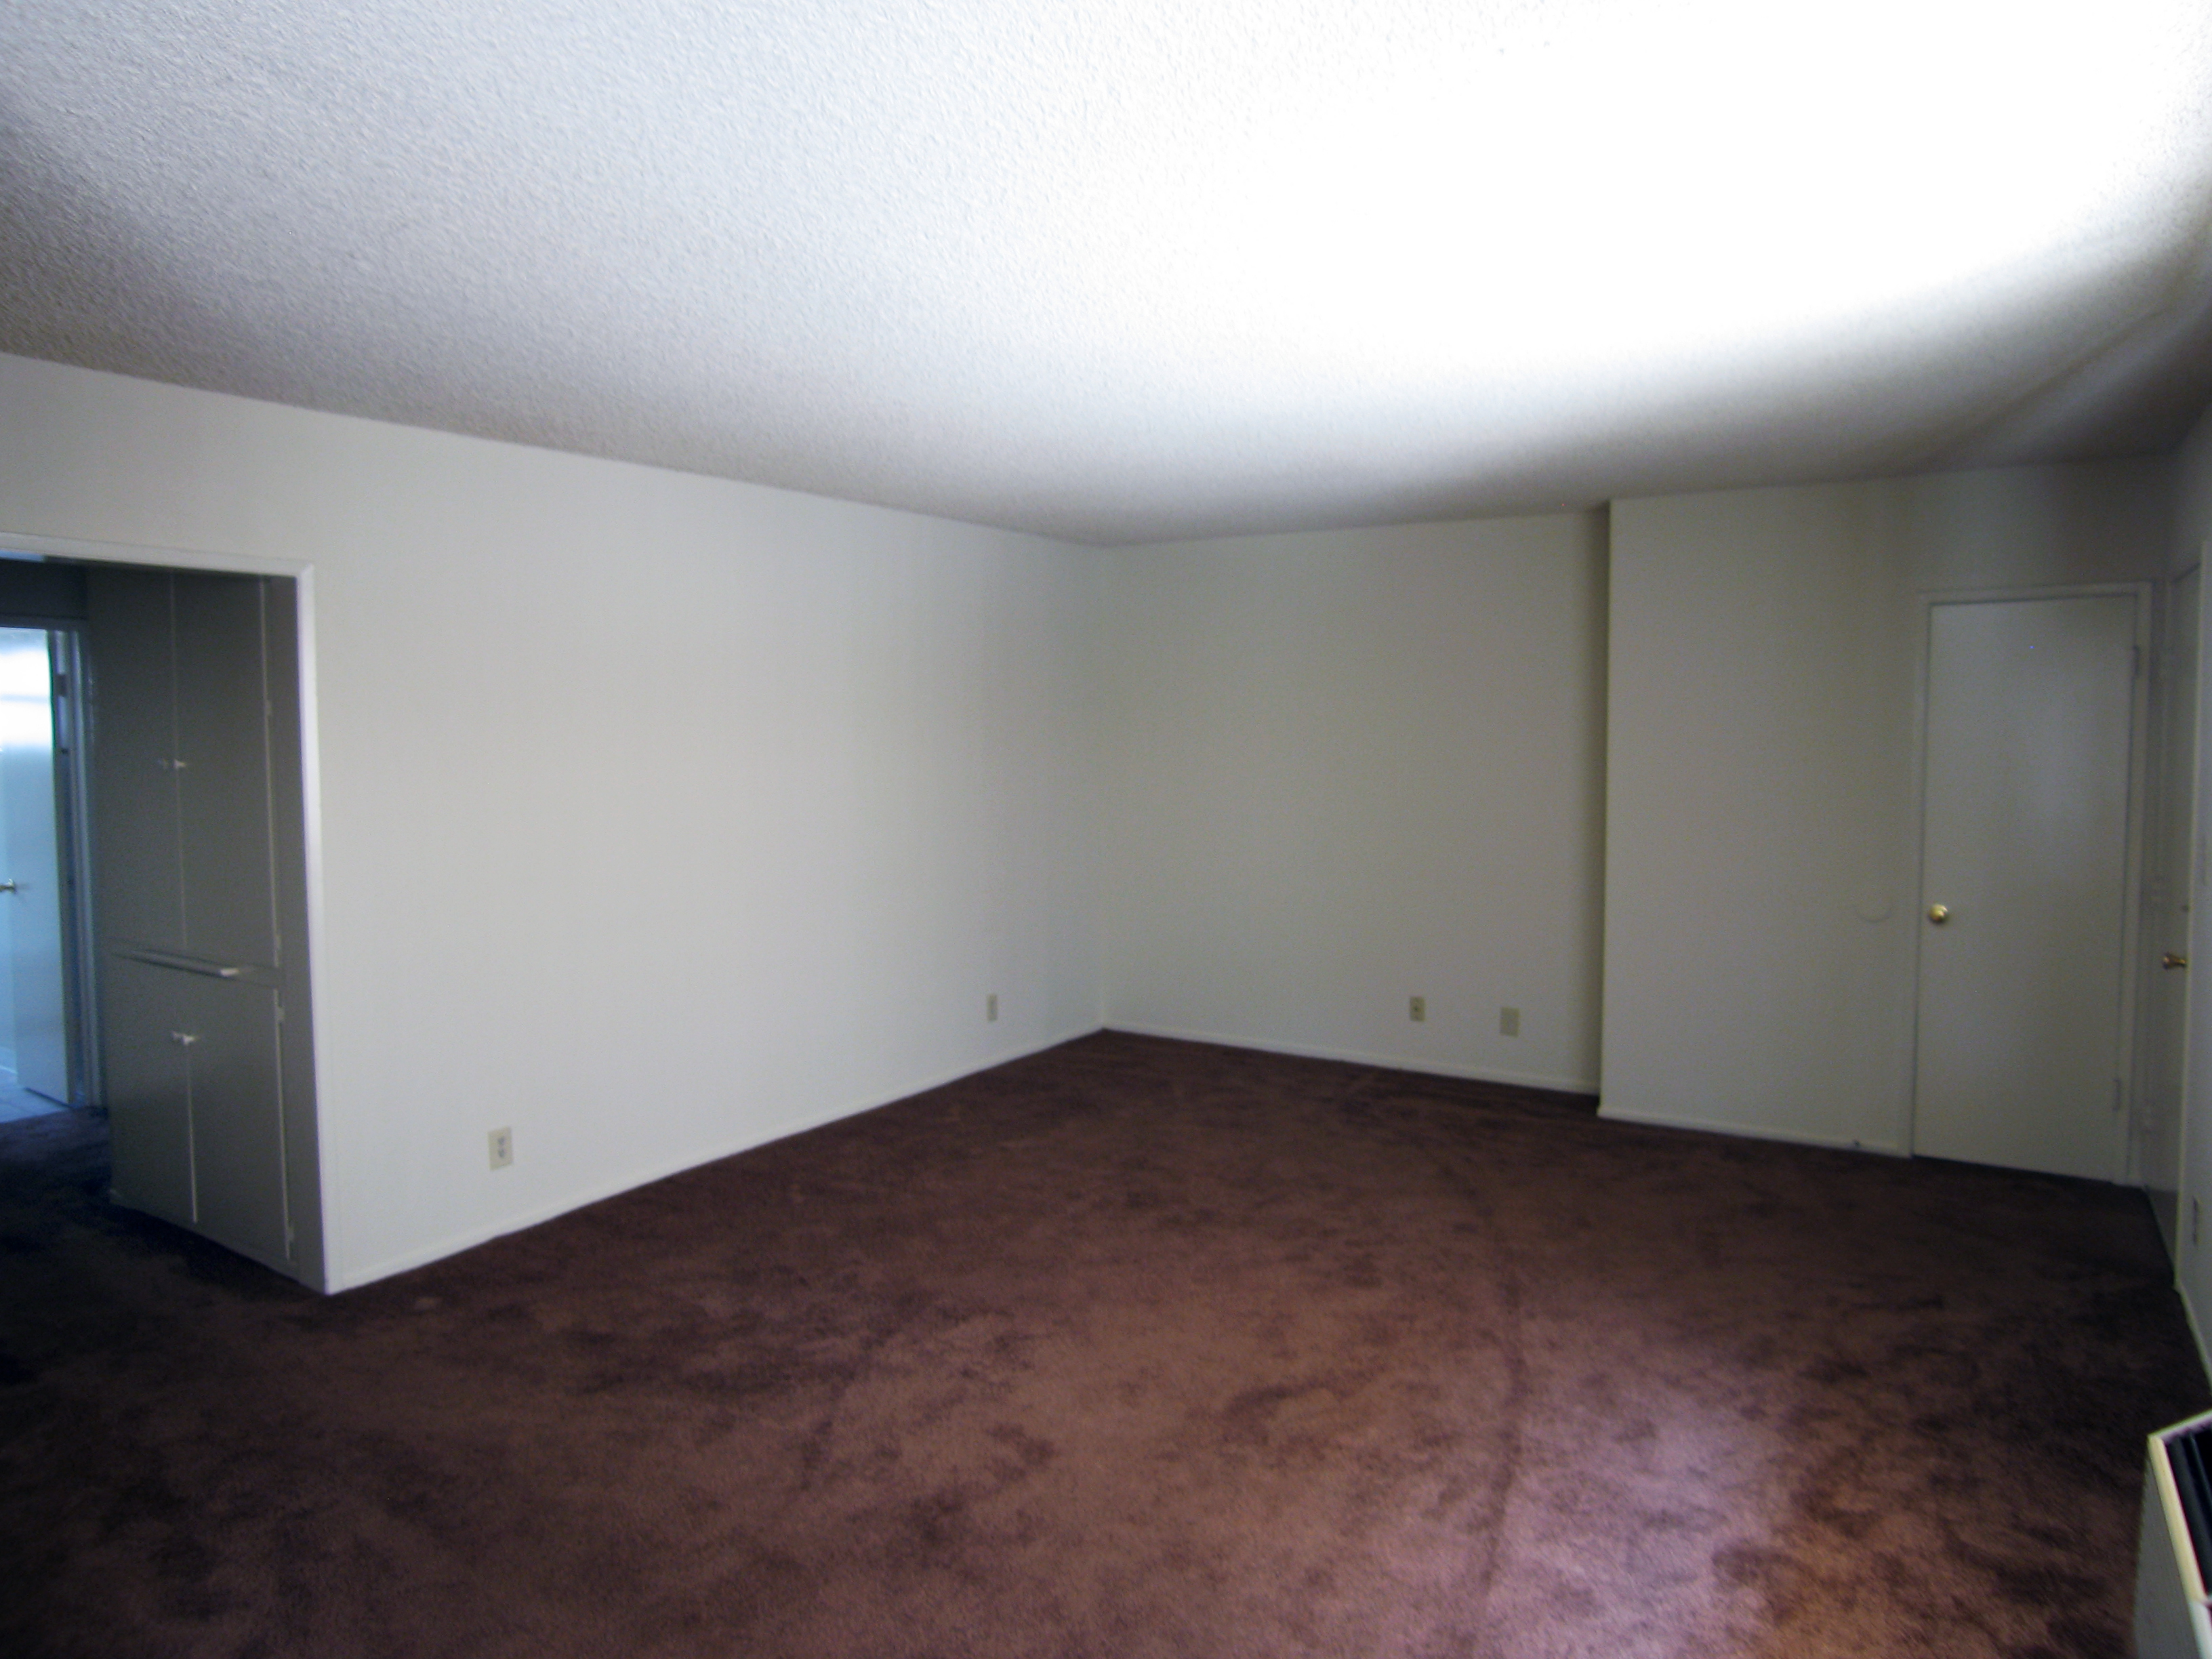 Image of the apartment living room